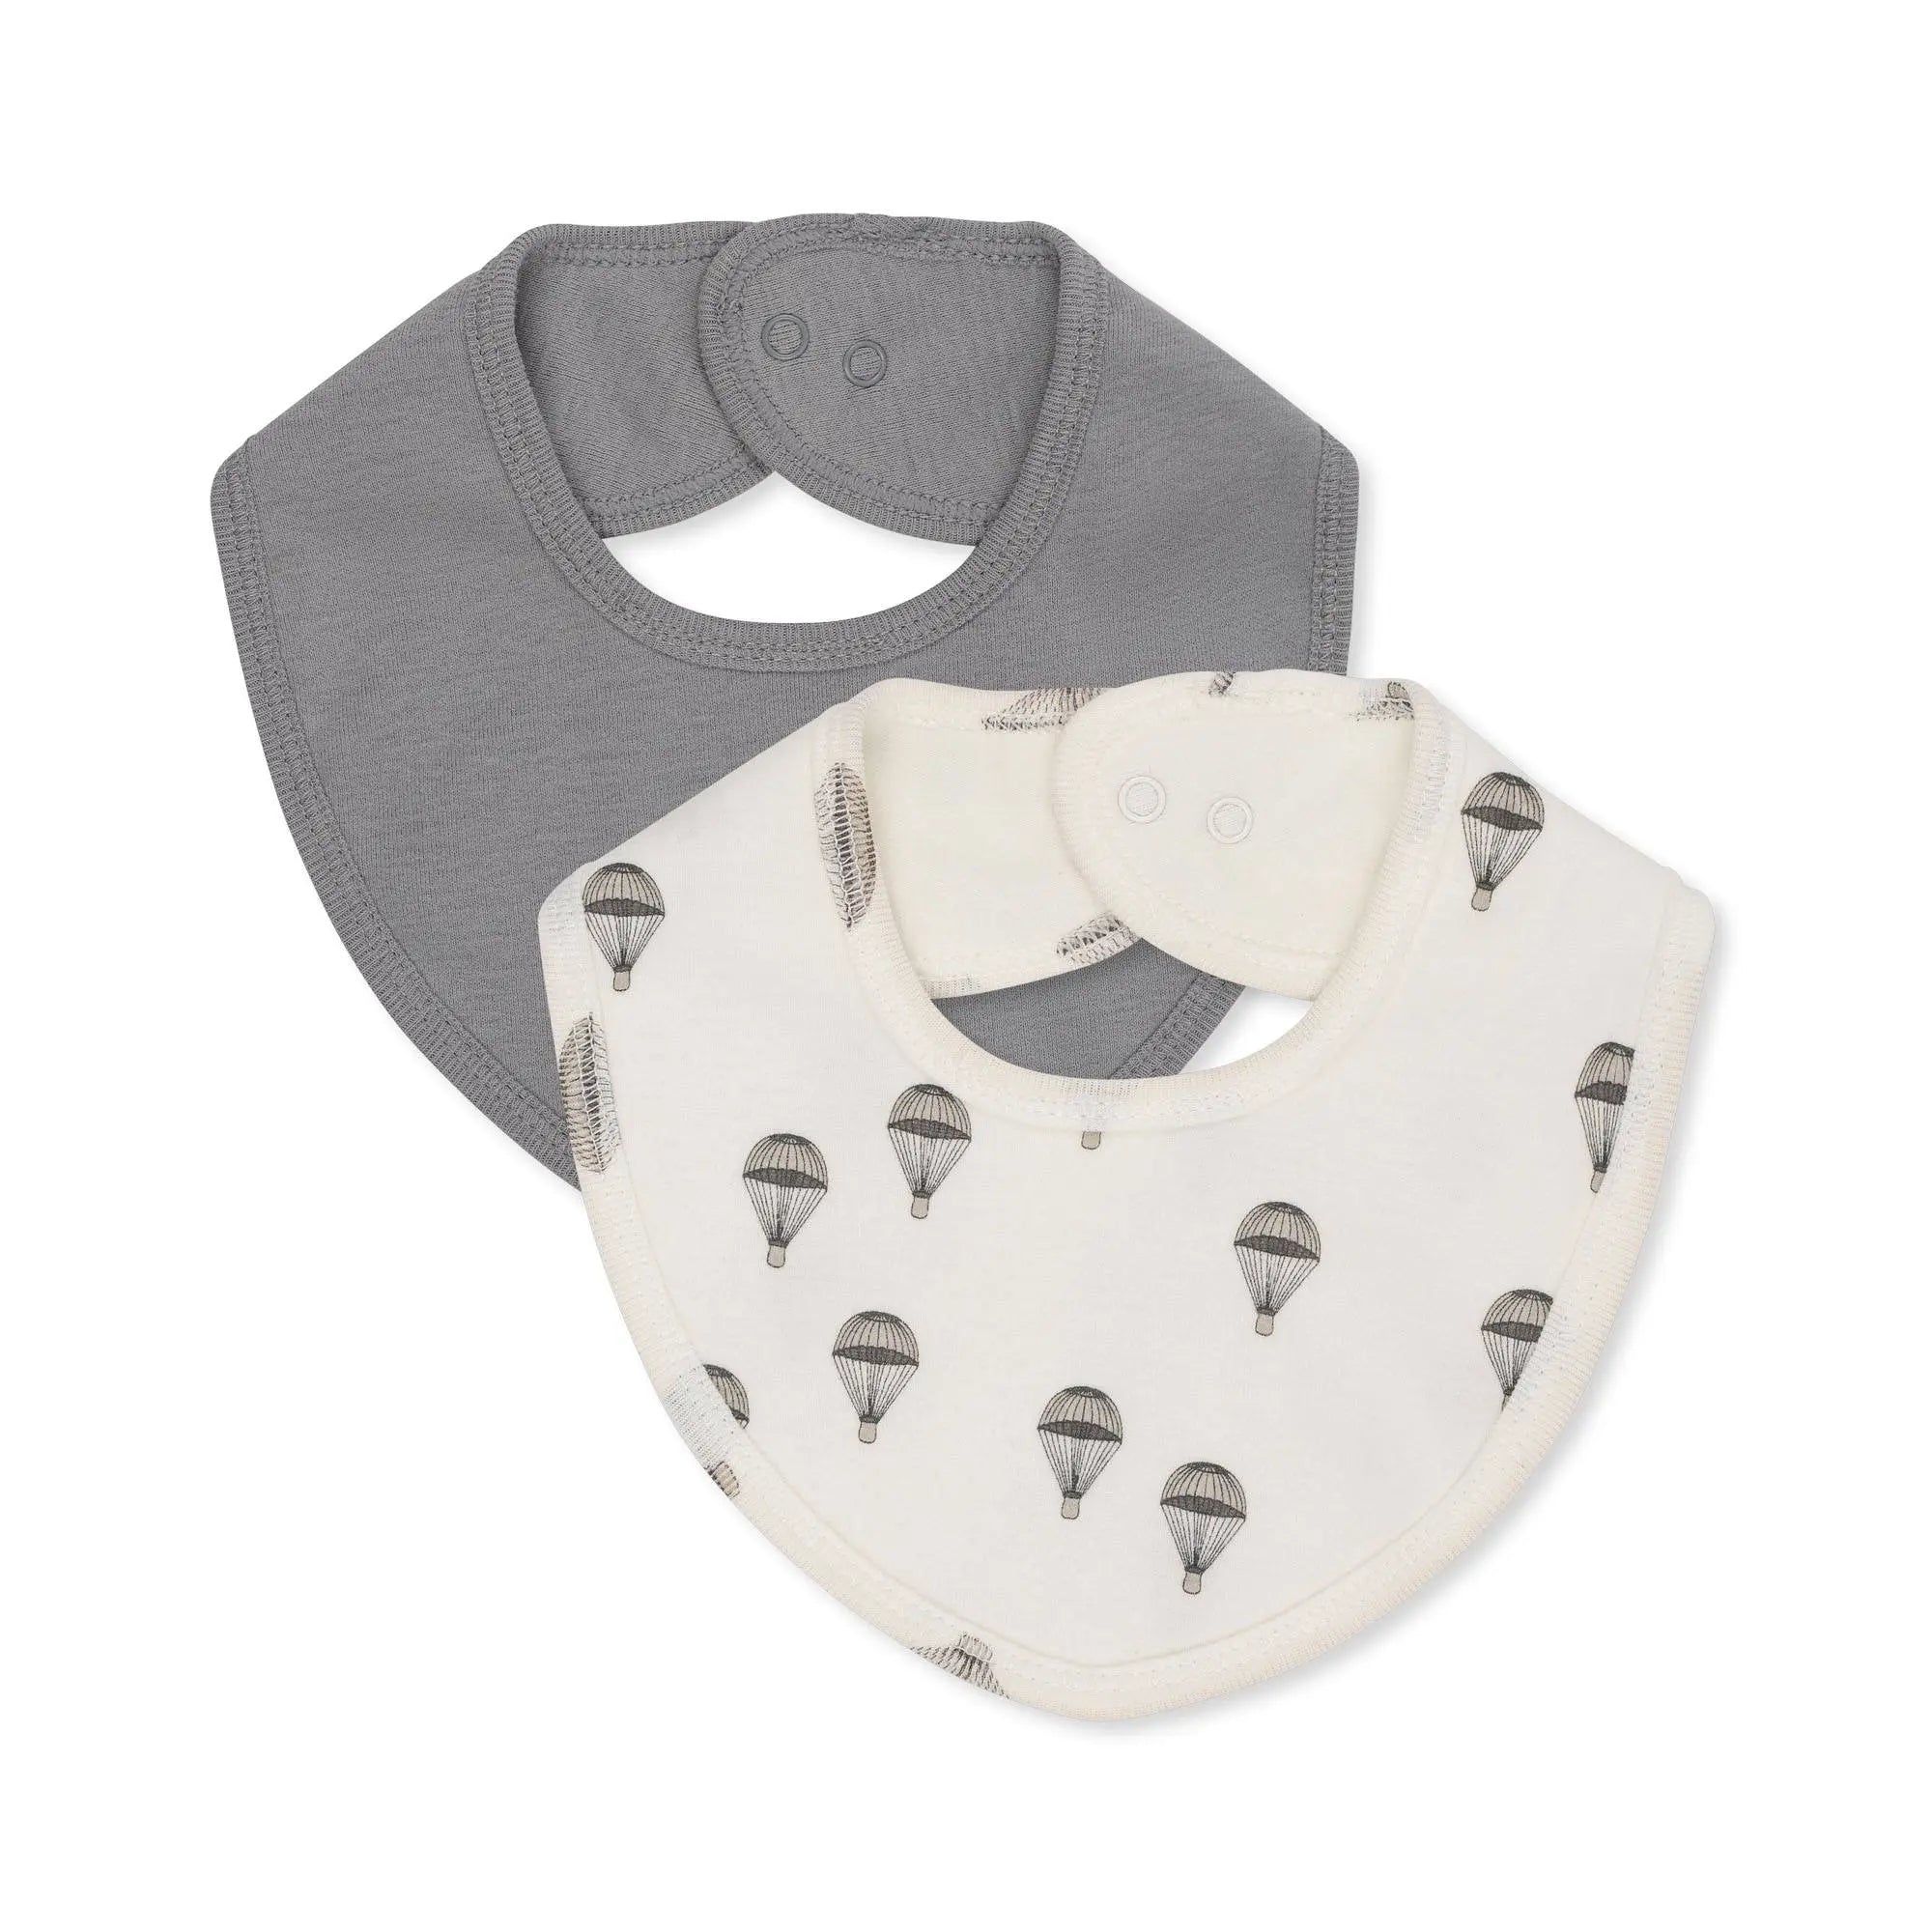 2 Pack Parachute Organic Cotton Baby Bibs, Soft and Absorbent, Feeding Essential  Konges Sløjd   